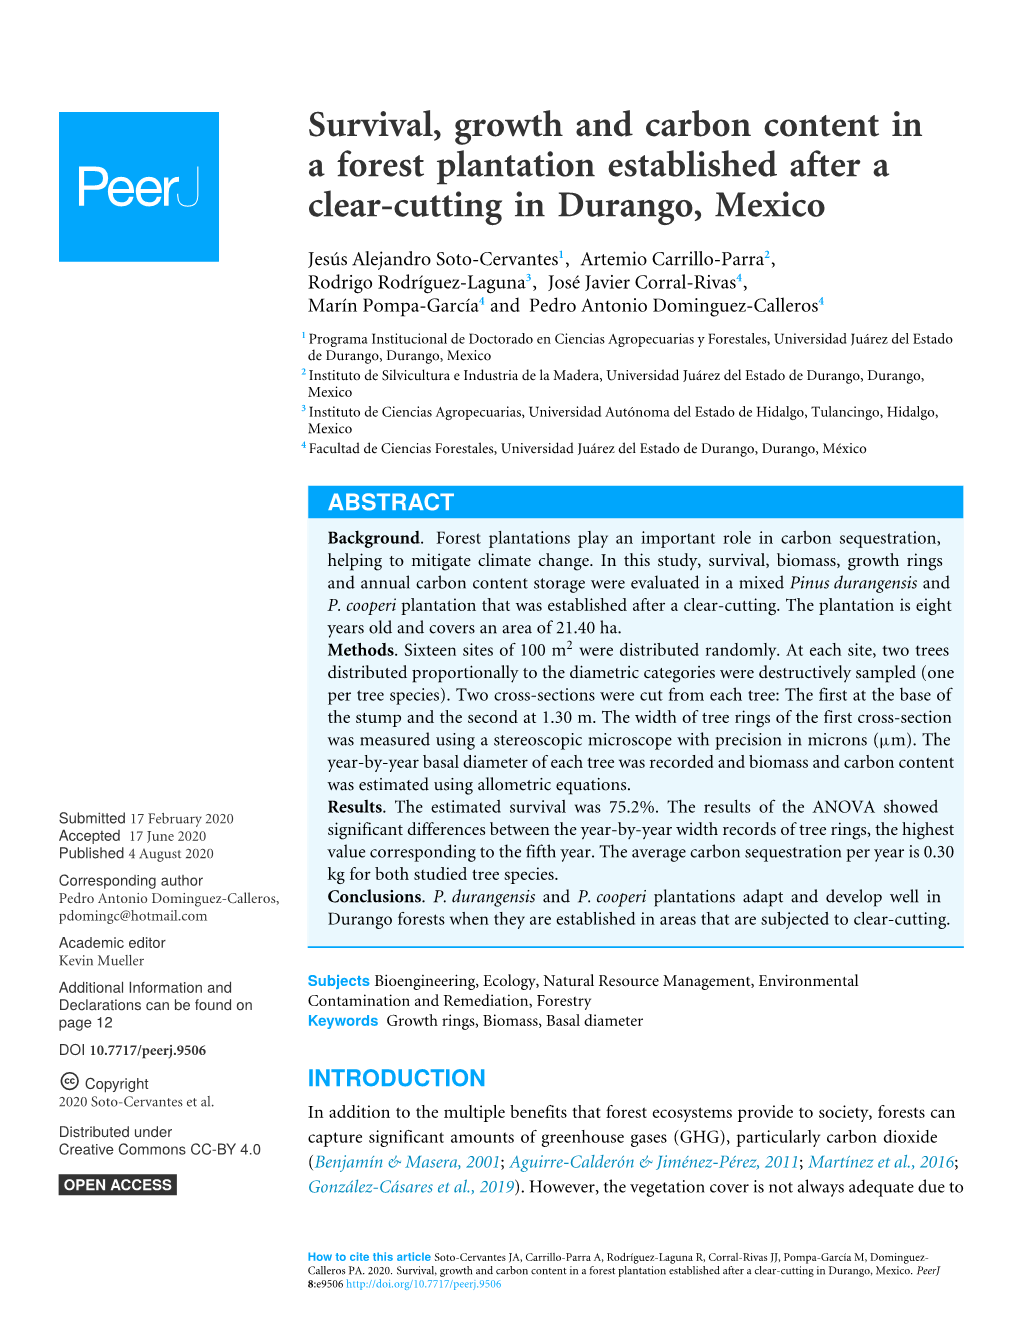 Survival, Growth and Carbon Content in a Forest Plantation Established After a Clear-Cutting in Durango, Mexico